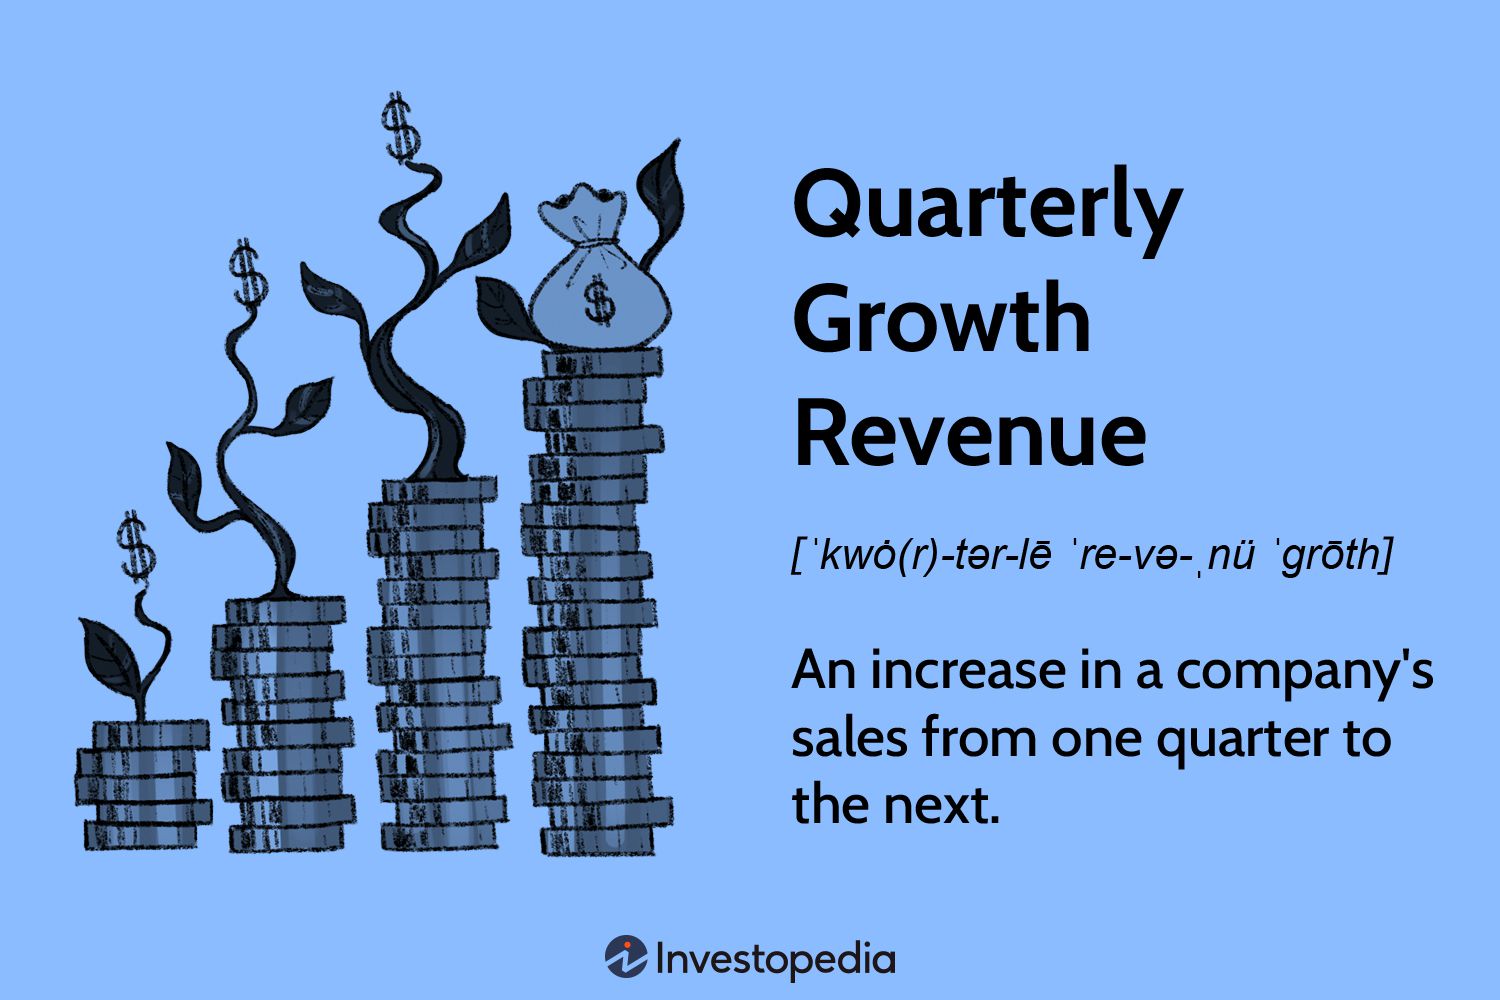 Quarterly revenue and profit growth - business admin training course decisions - master financial reporting using Quickbooks, MYOB and Xero Courses